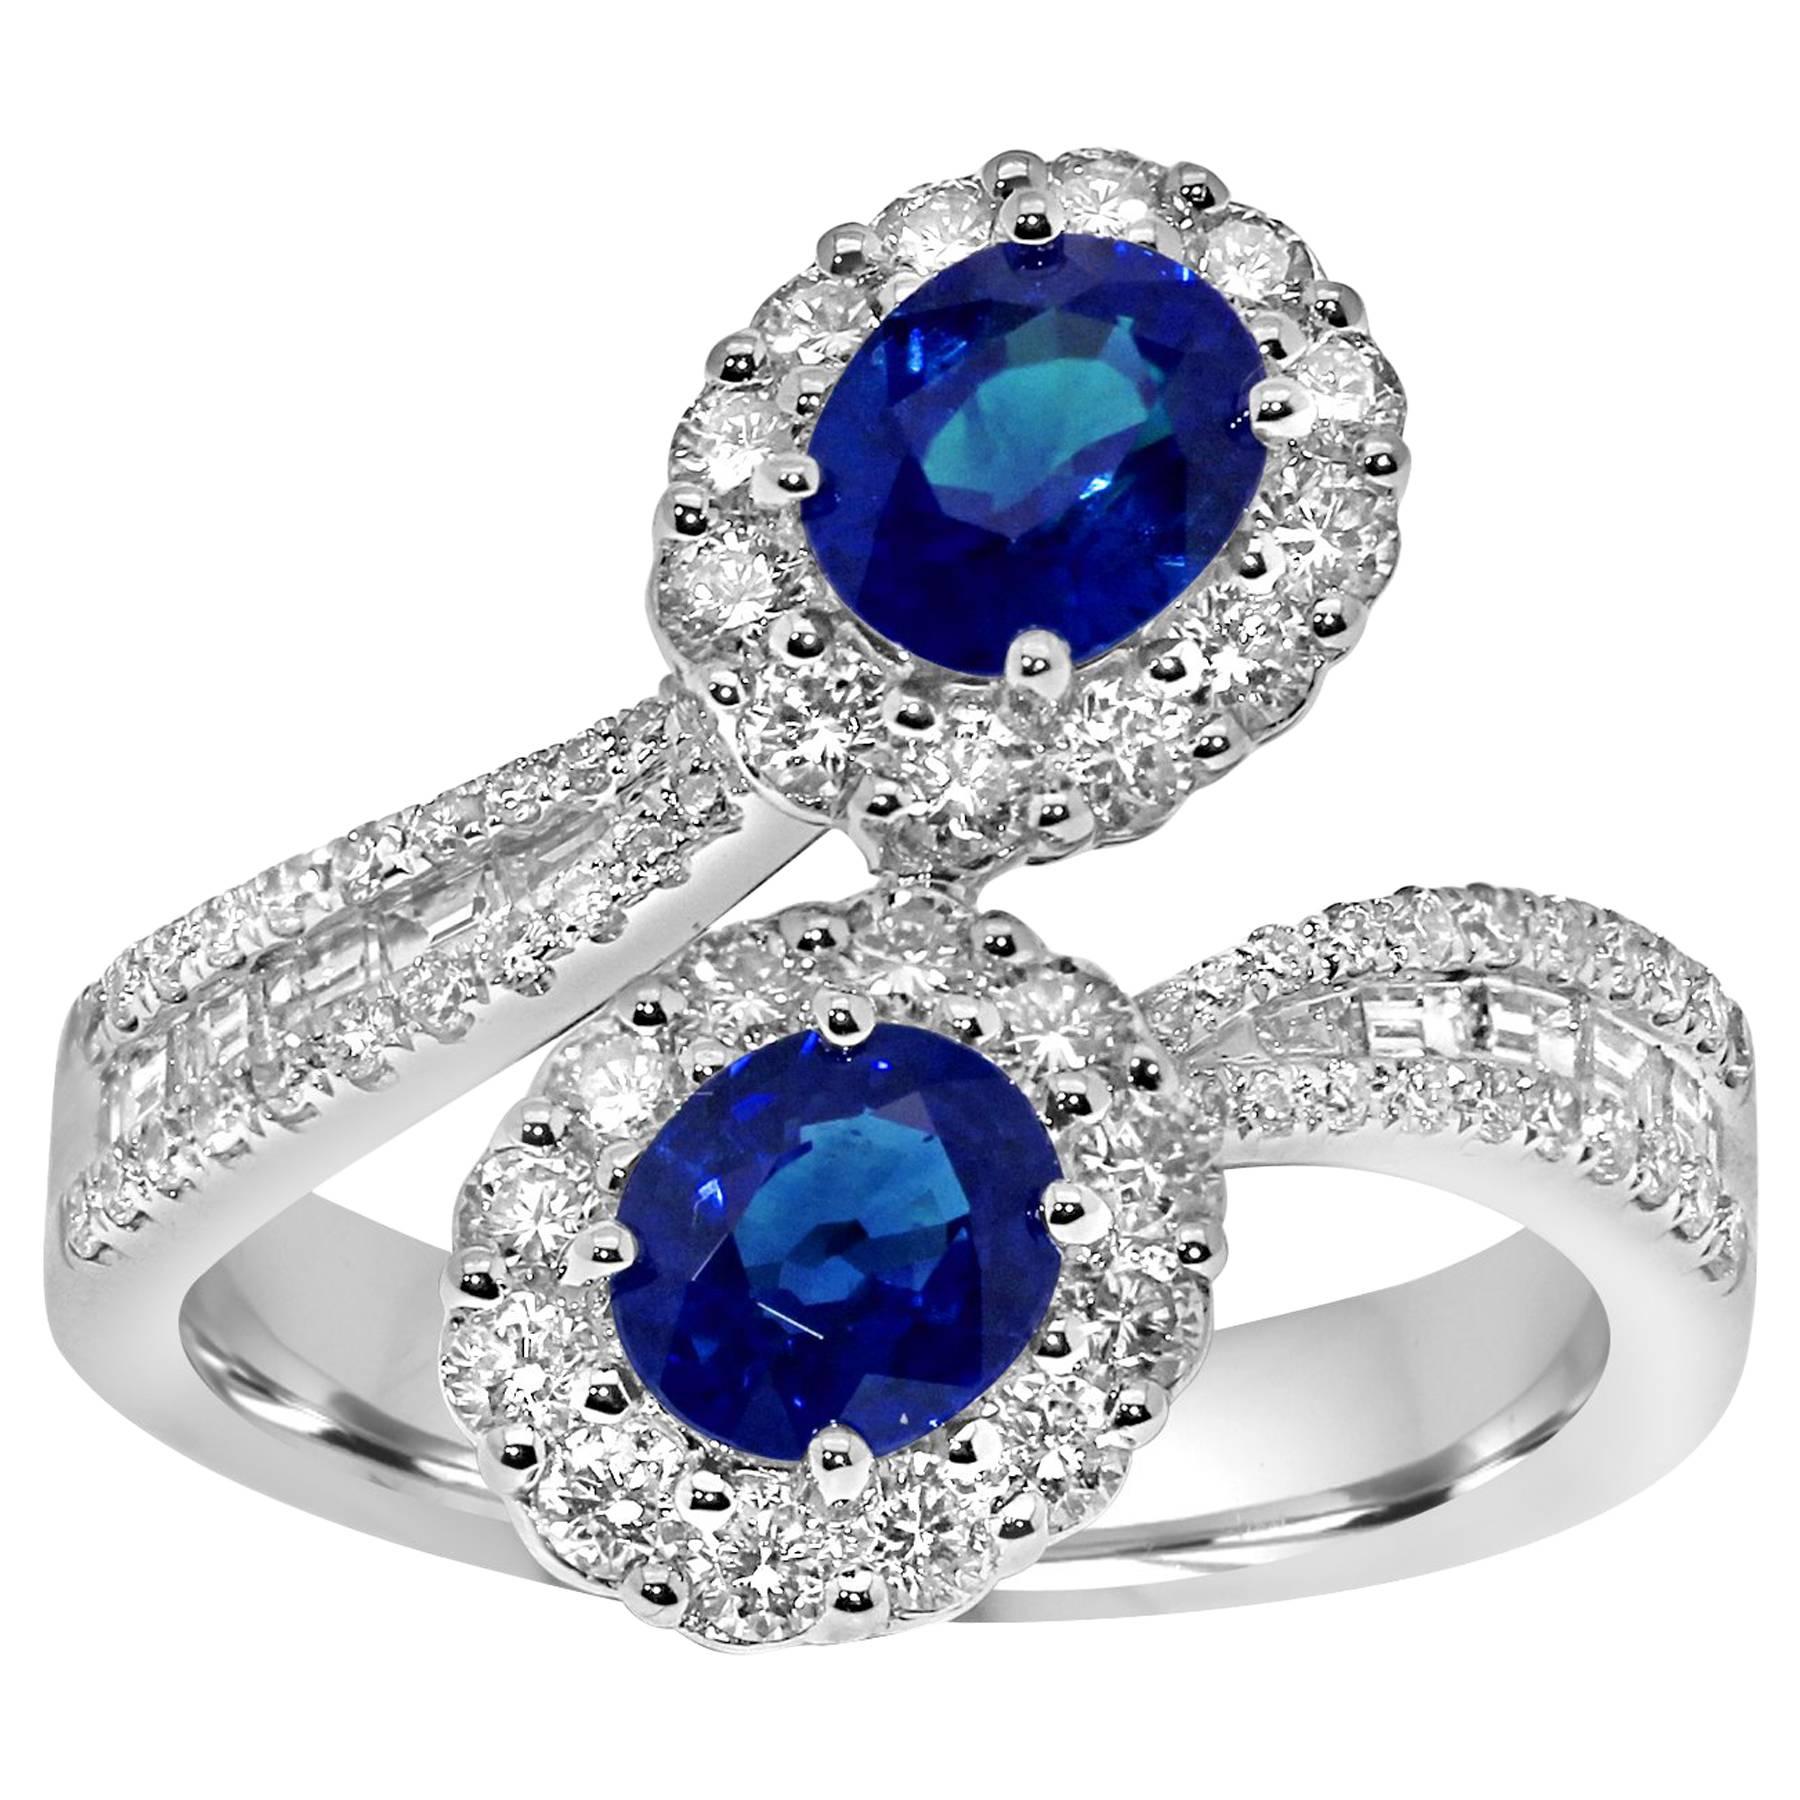 Platinum Toi-et-Moi Ring Set with Diamonds and Blue Sapphires Gemstones For Sale